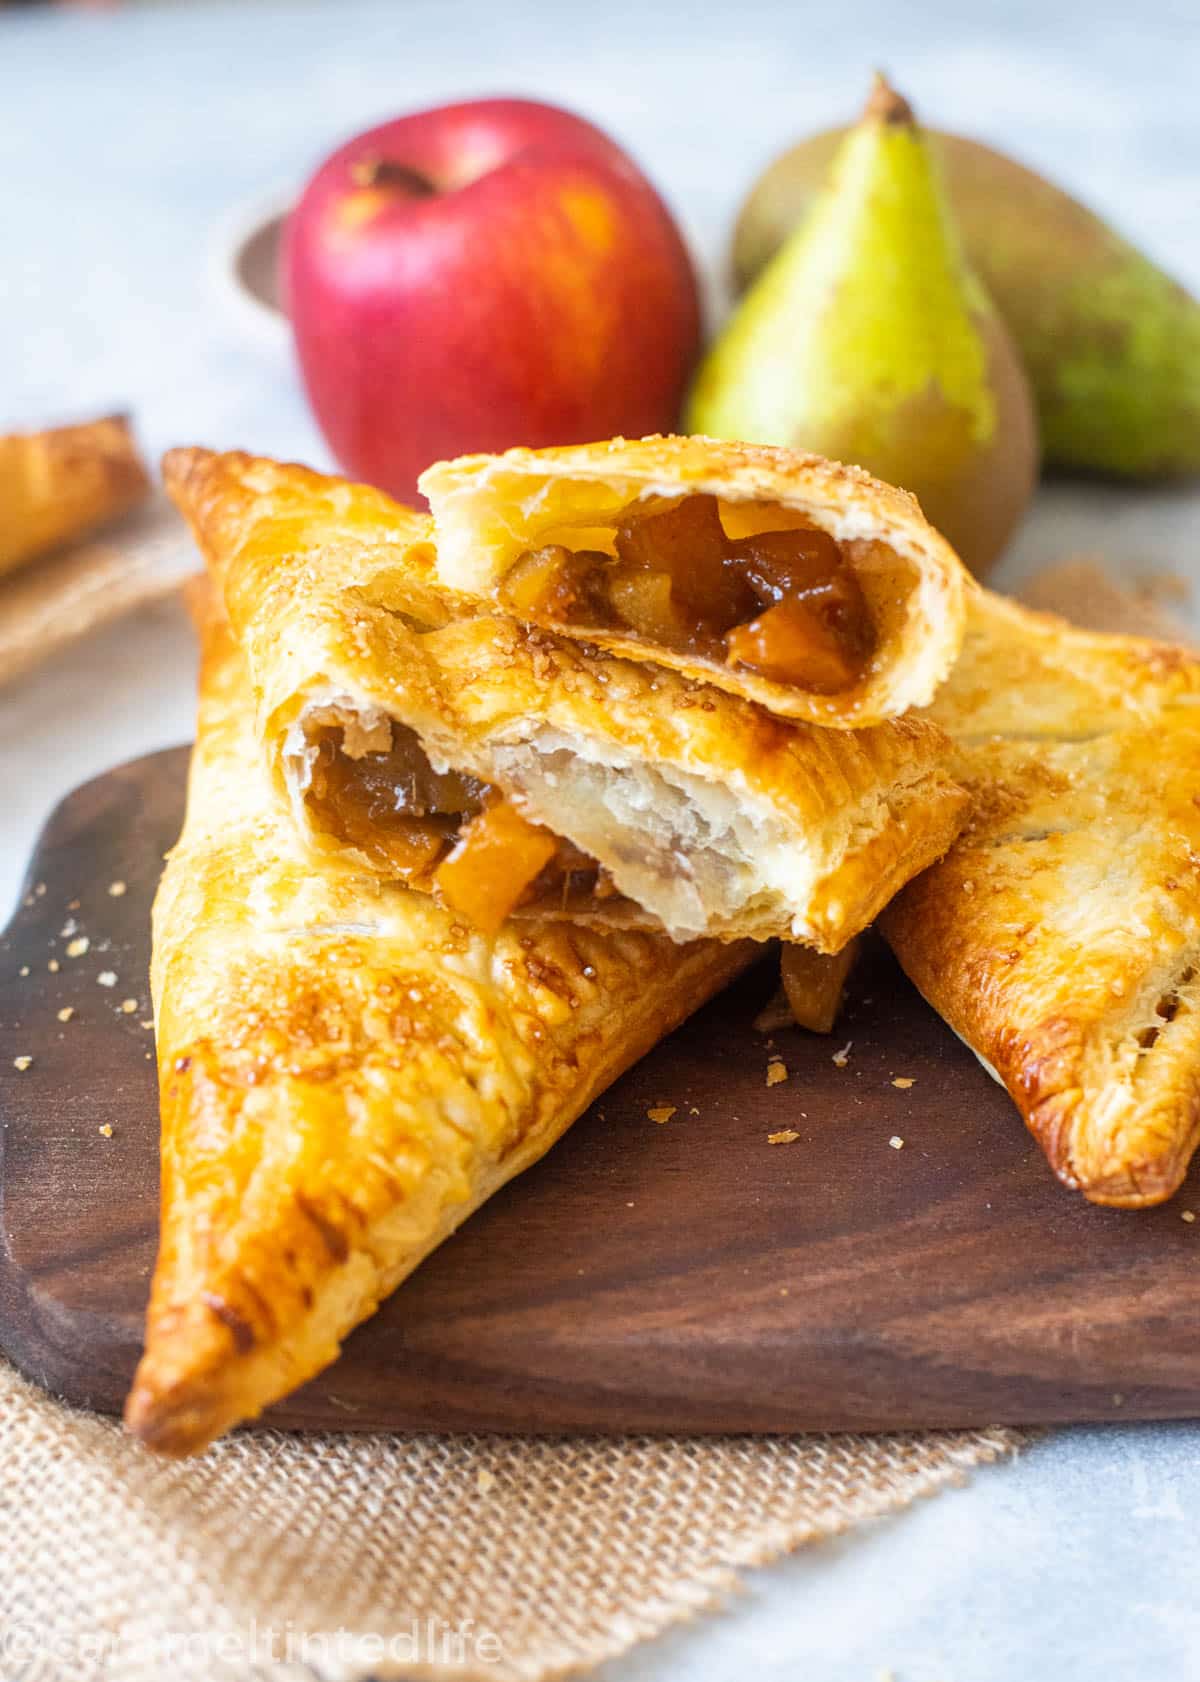 Apple an pear turnover broken into two